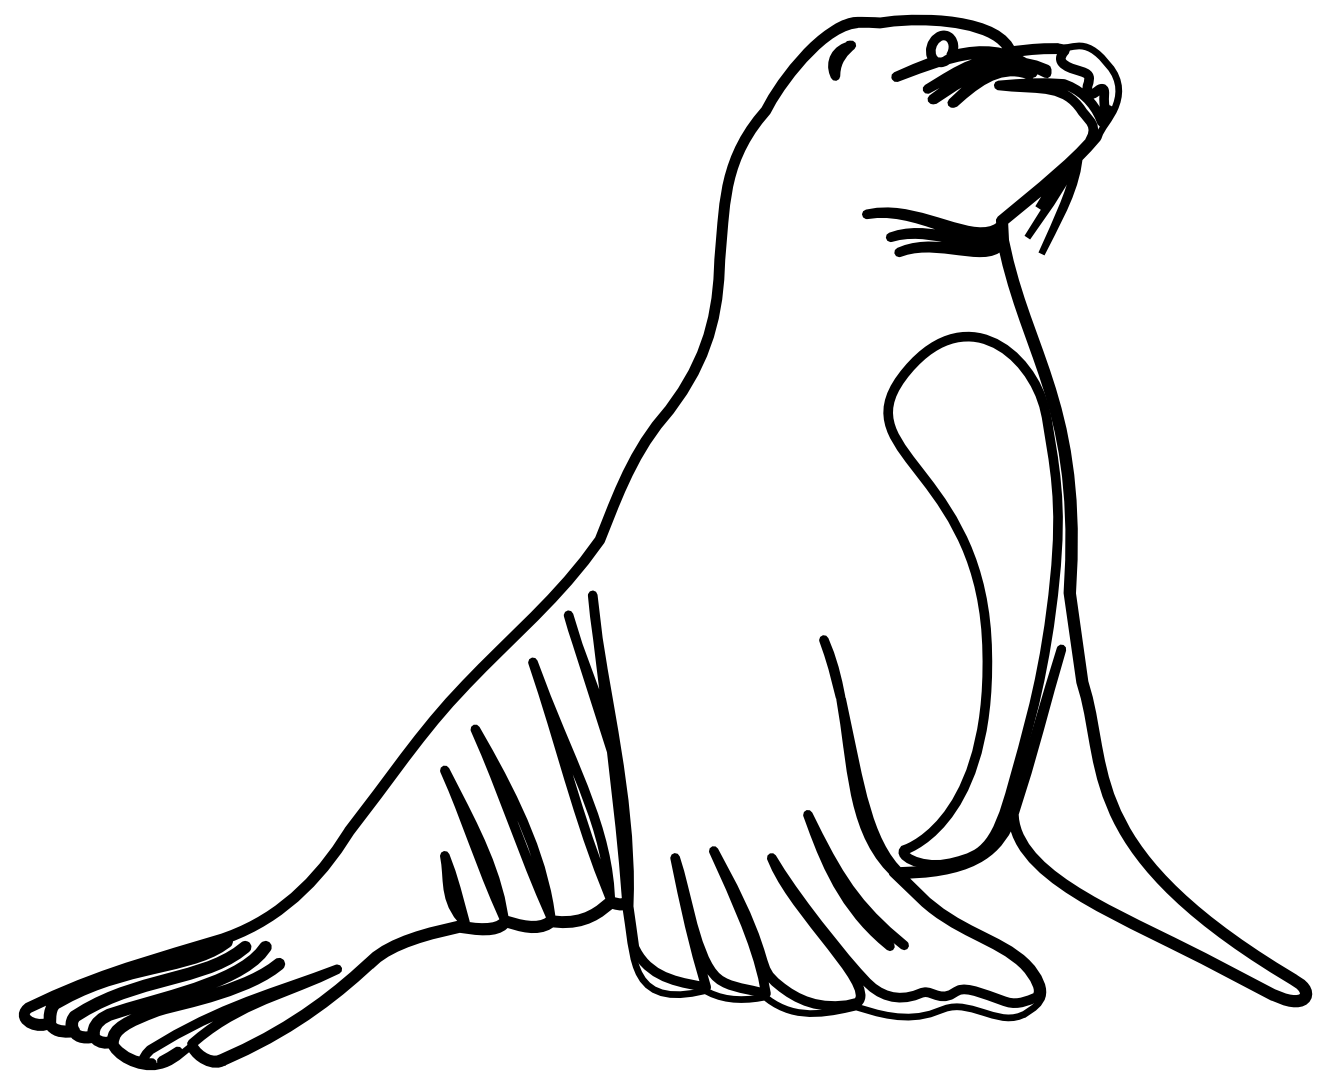 How To Draw A Sea Lion Easily - Clipart library